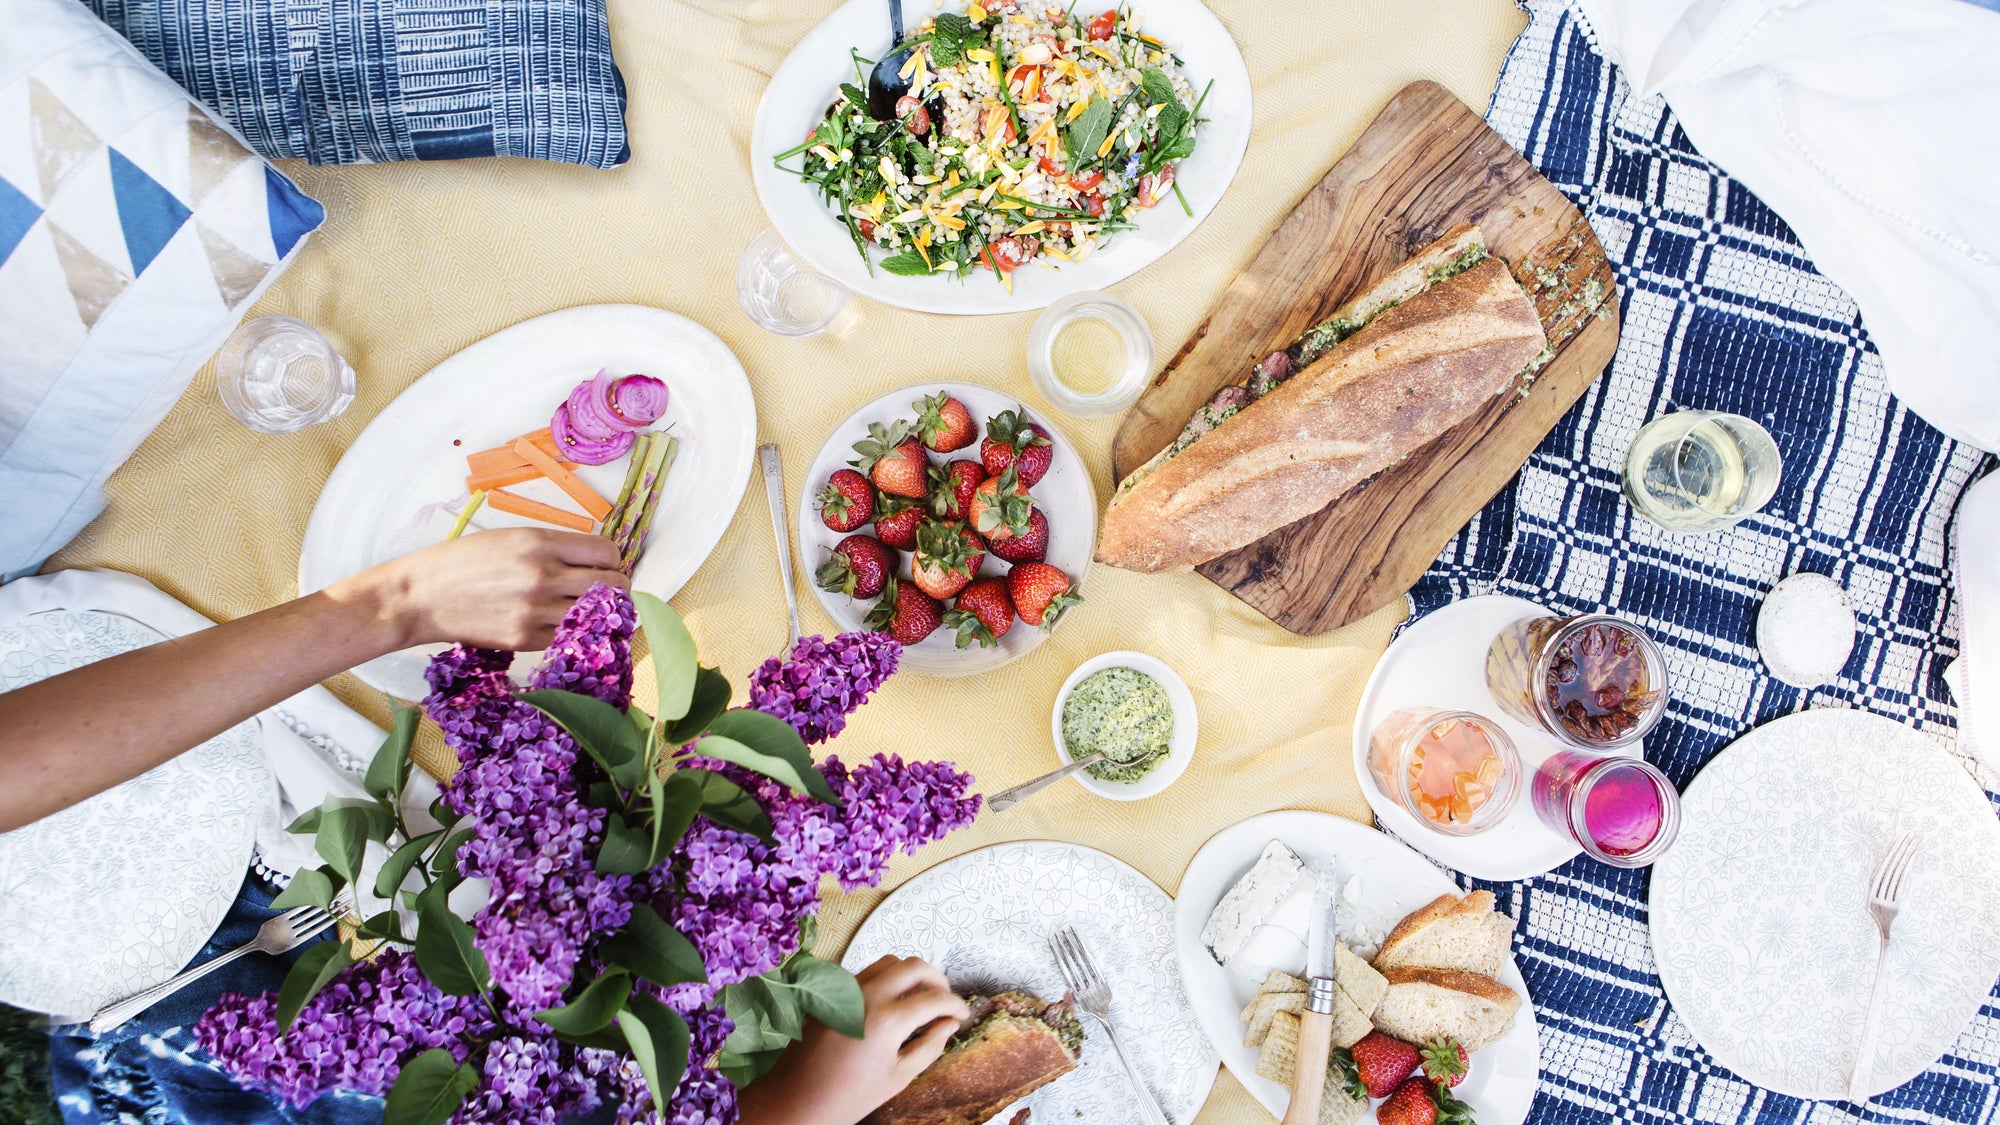 Spring is here: everything you'll need for a gut-loving picnic